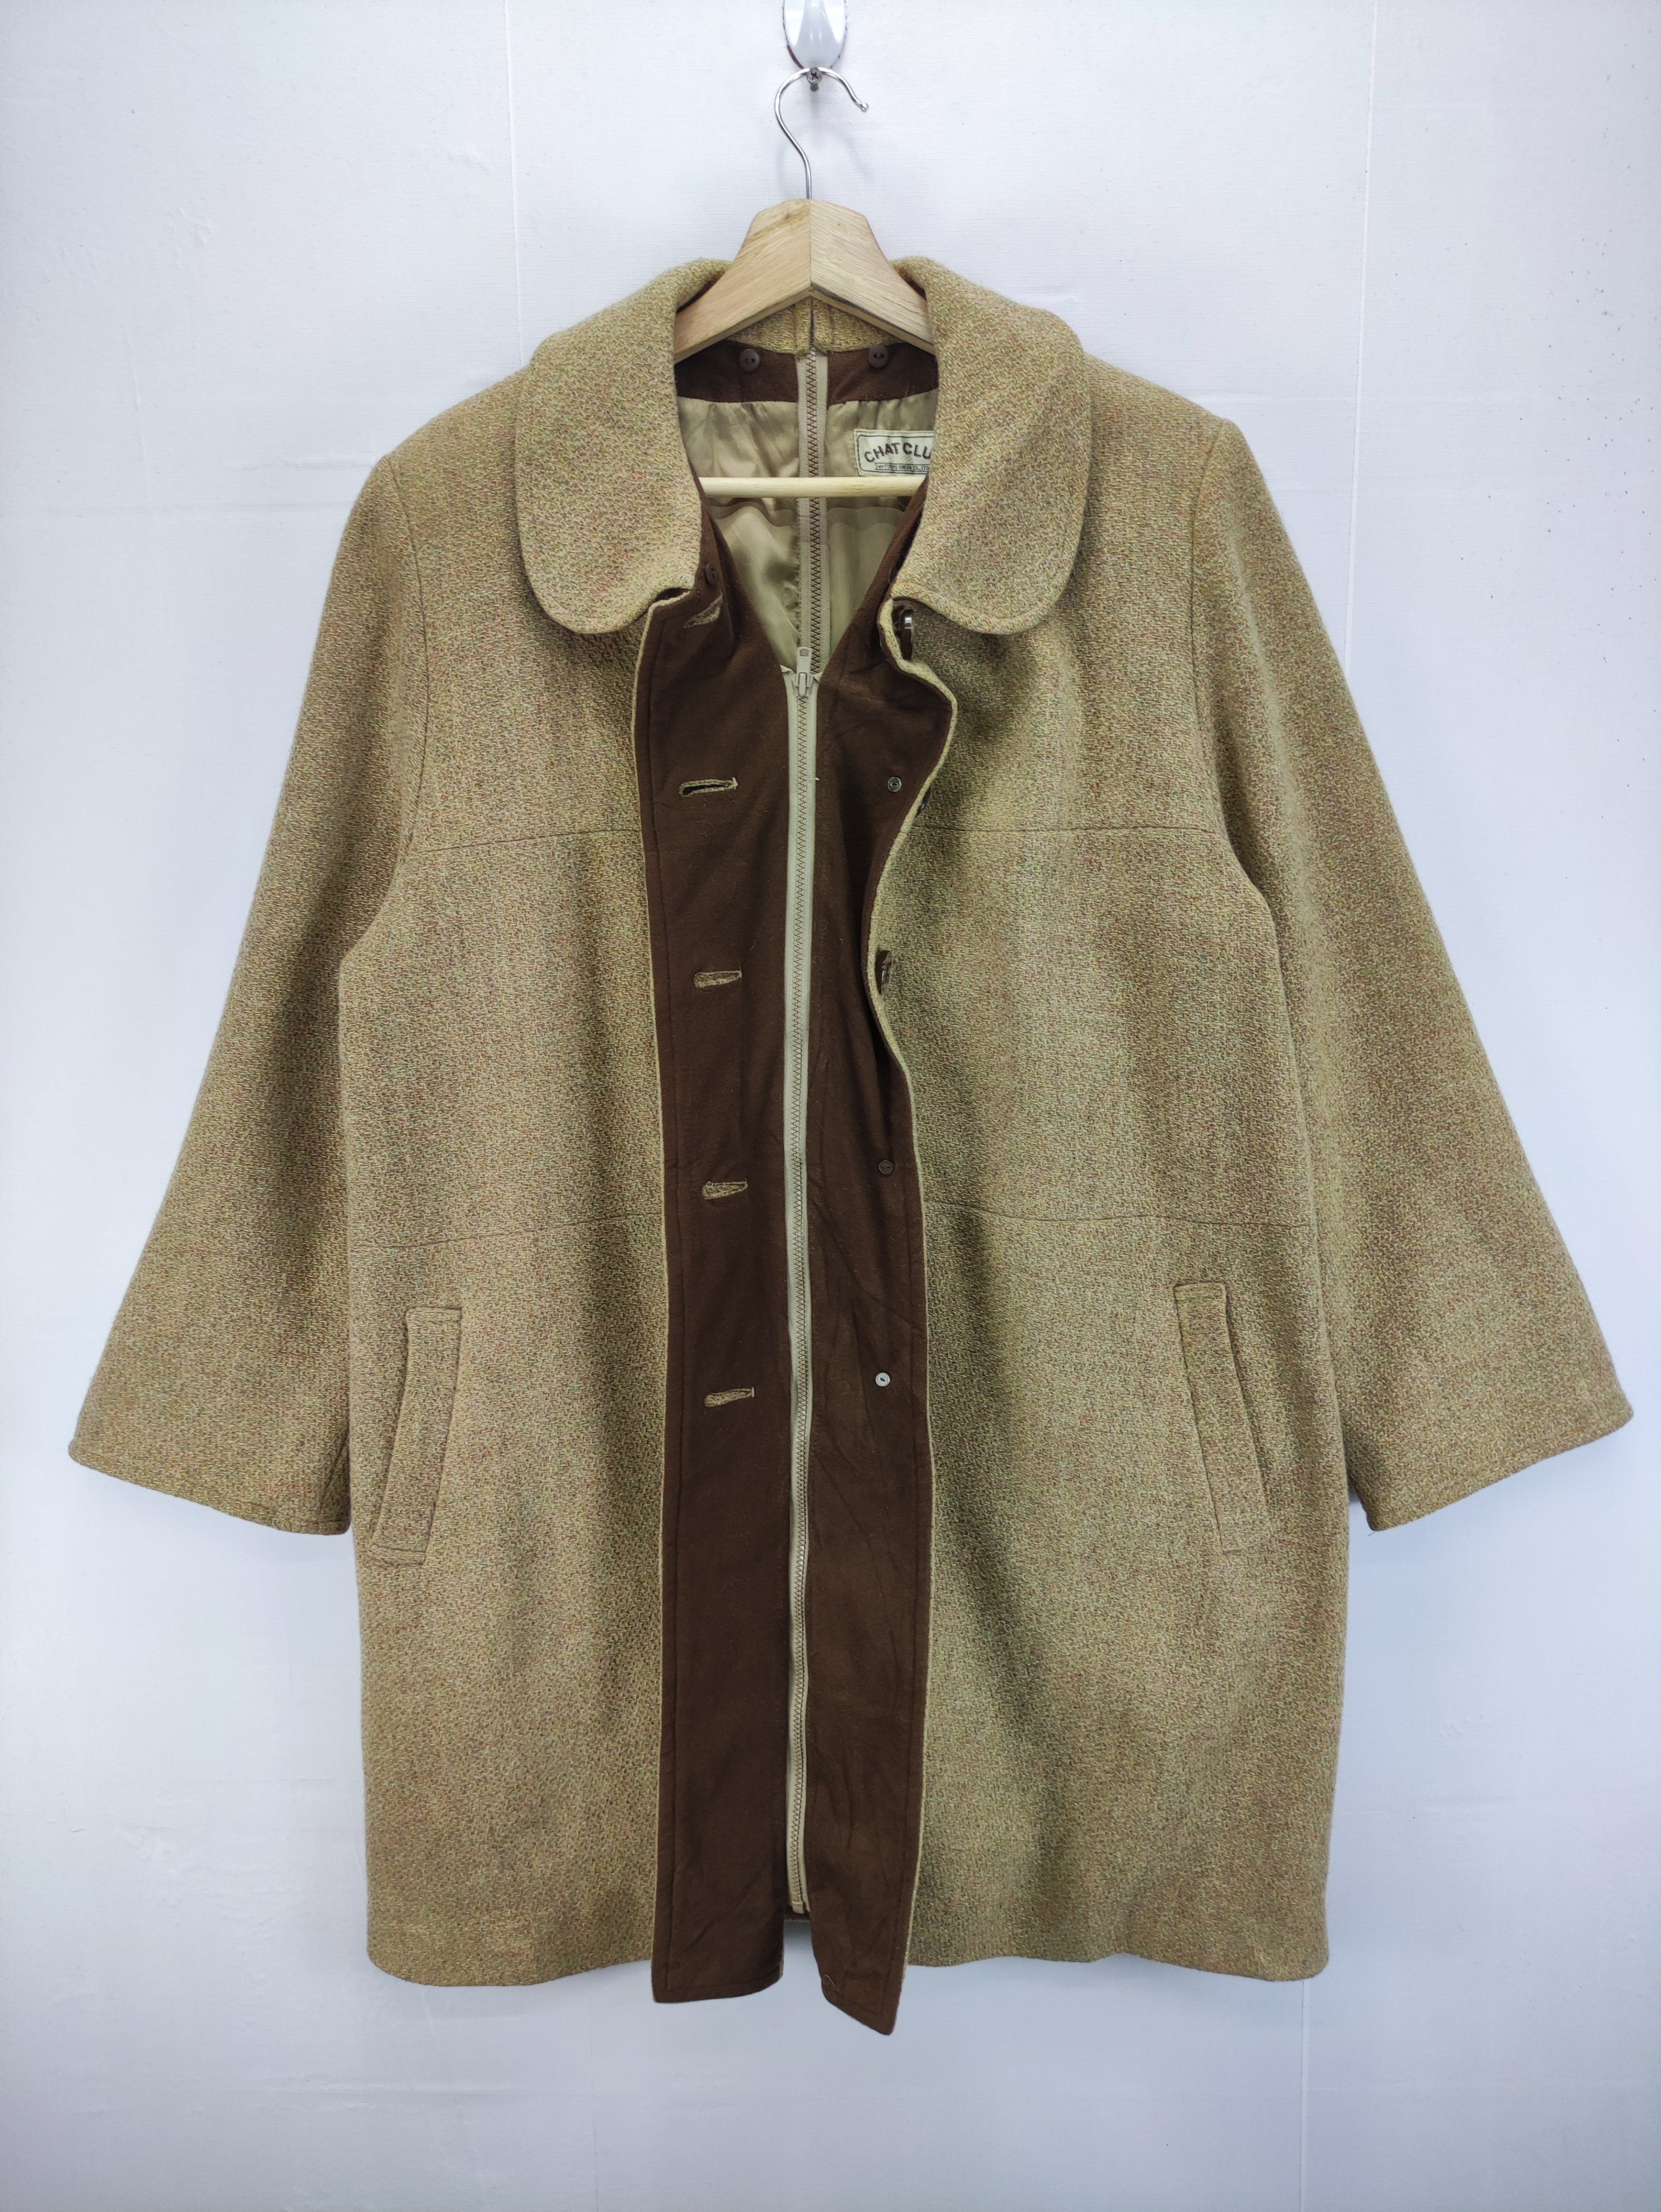 Vintage Wool Jacket Button Up Zipper By Chat Club - 4